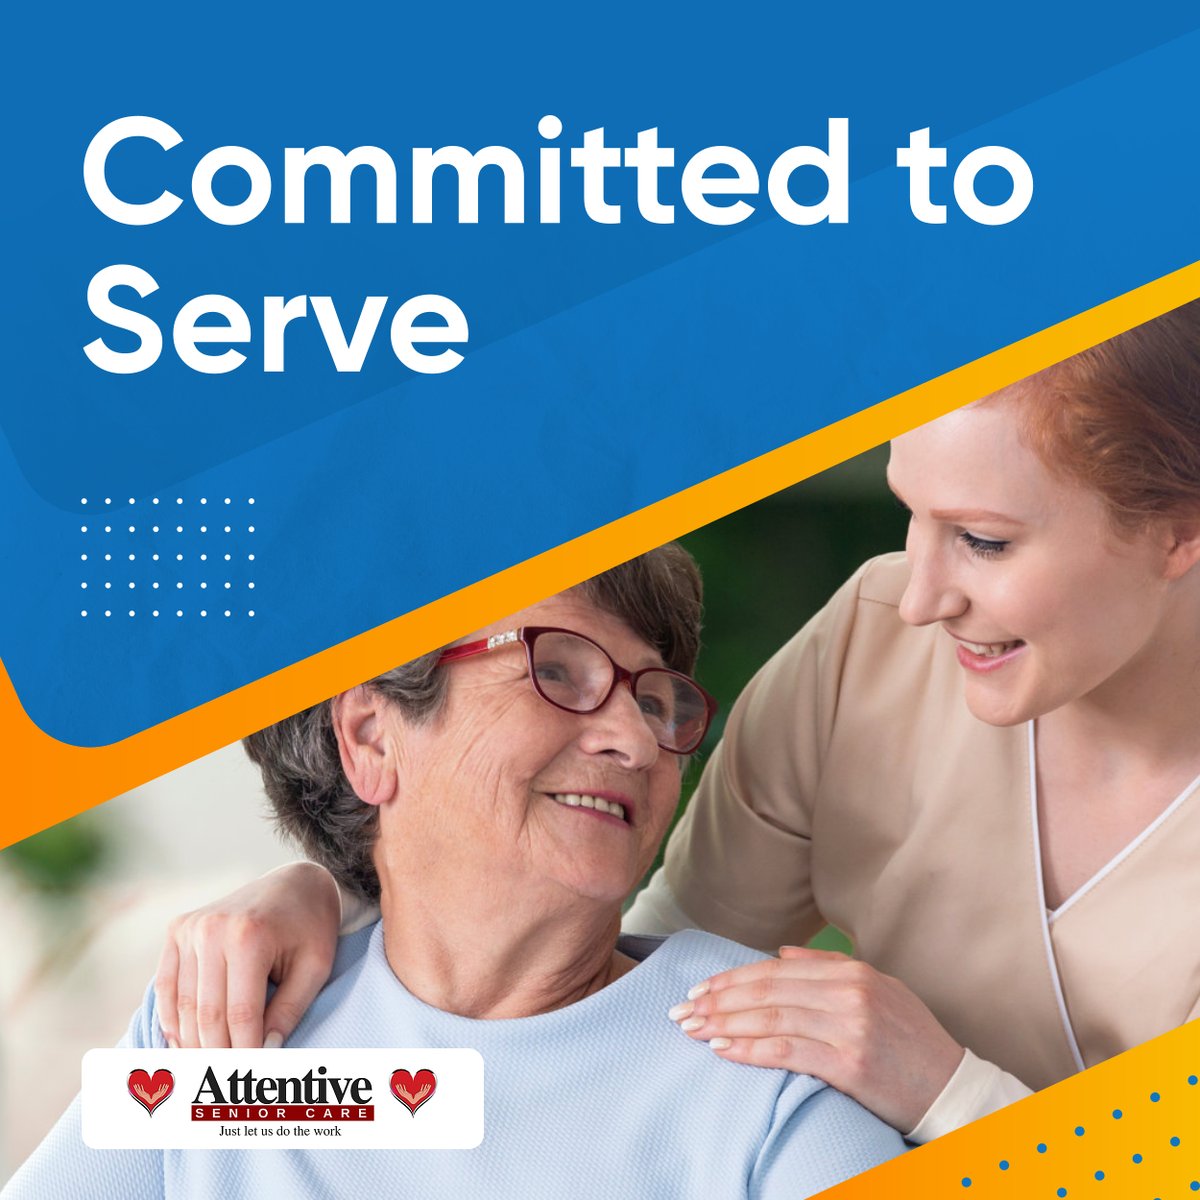 Because we care about you, we go above and above to provide extra mile services that are assured to be of the greatest quality. Allow us to make a difference in your lives. Contact us now. #QualityServices #SeniorCareHome #FresnoCA